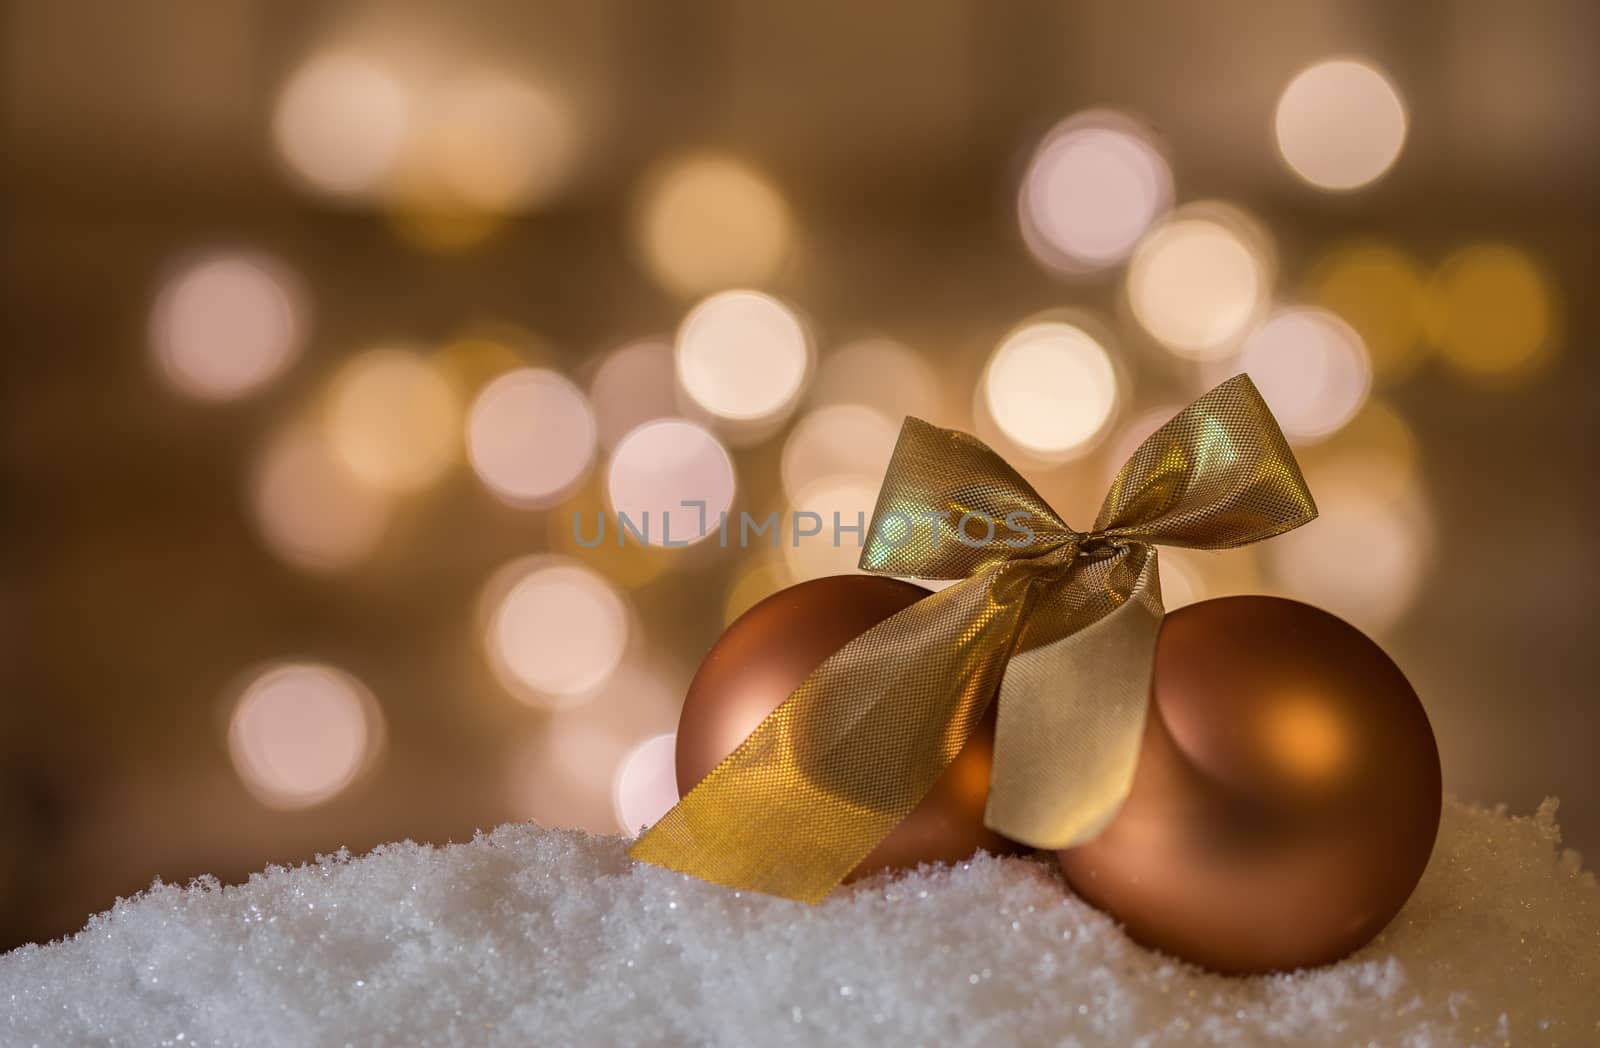 Golden Christmas ornaments with ribbon bow on snow with blurred lights background, copy space